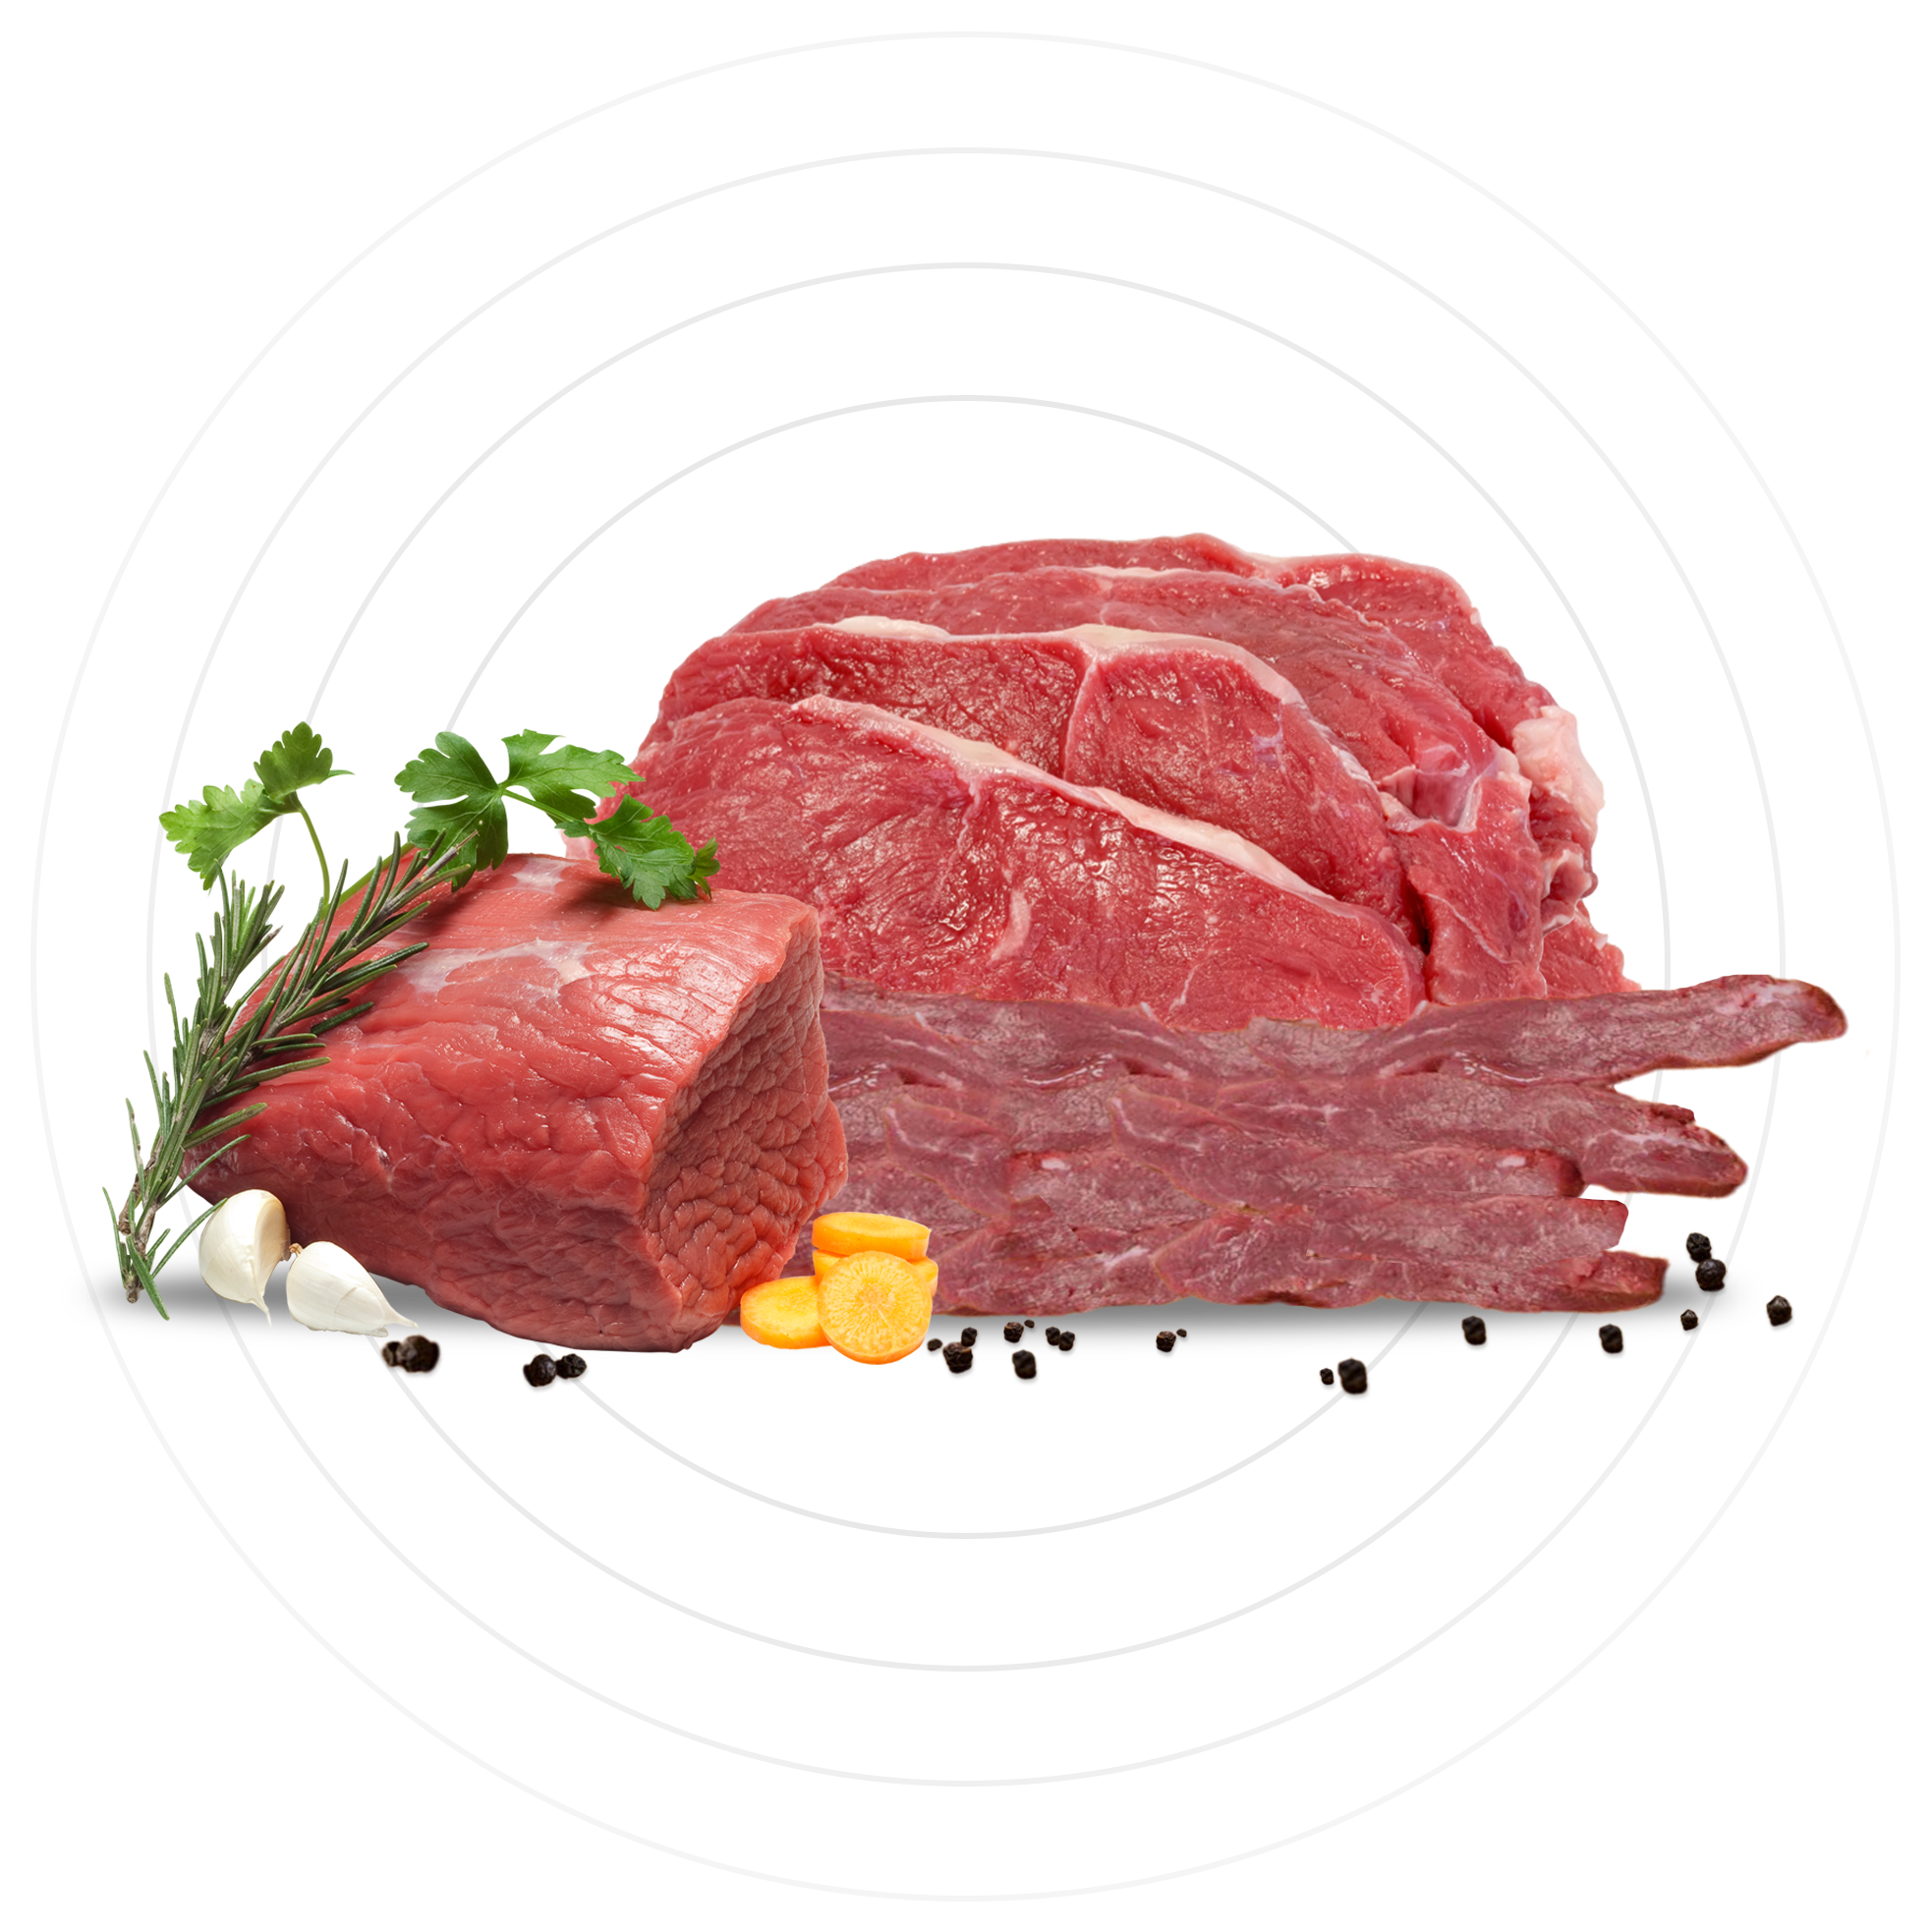 This image icon displays the Purdy's Quality Meats Meat Products image